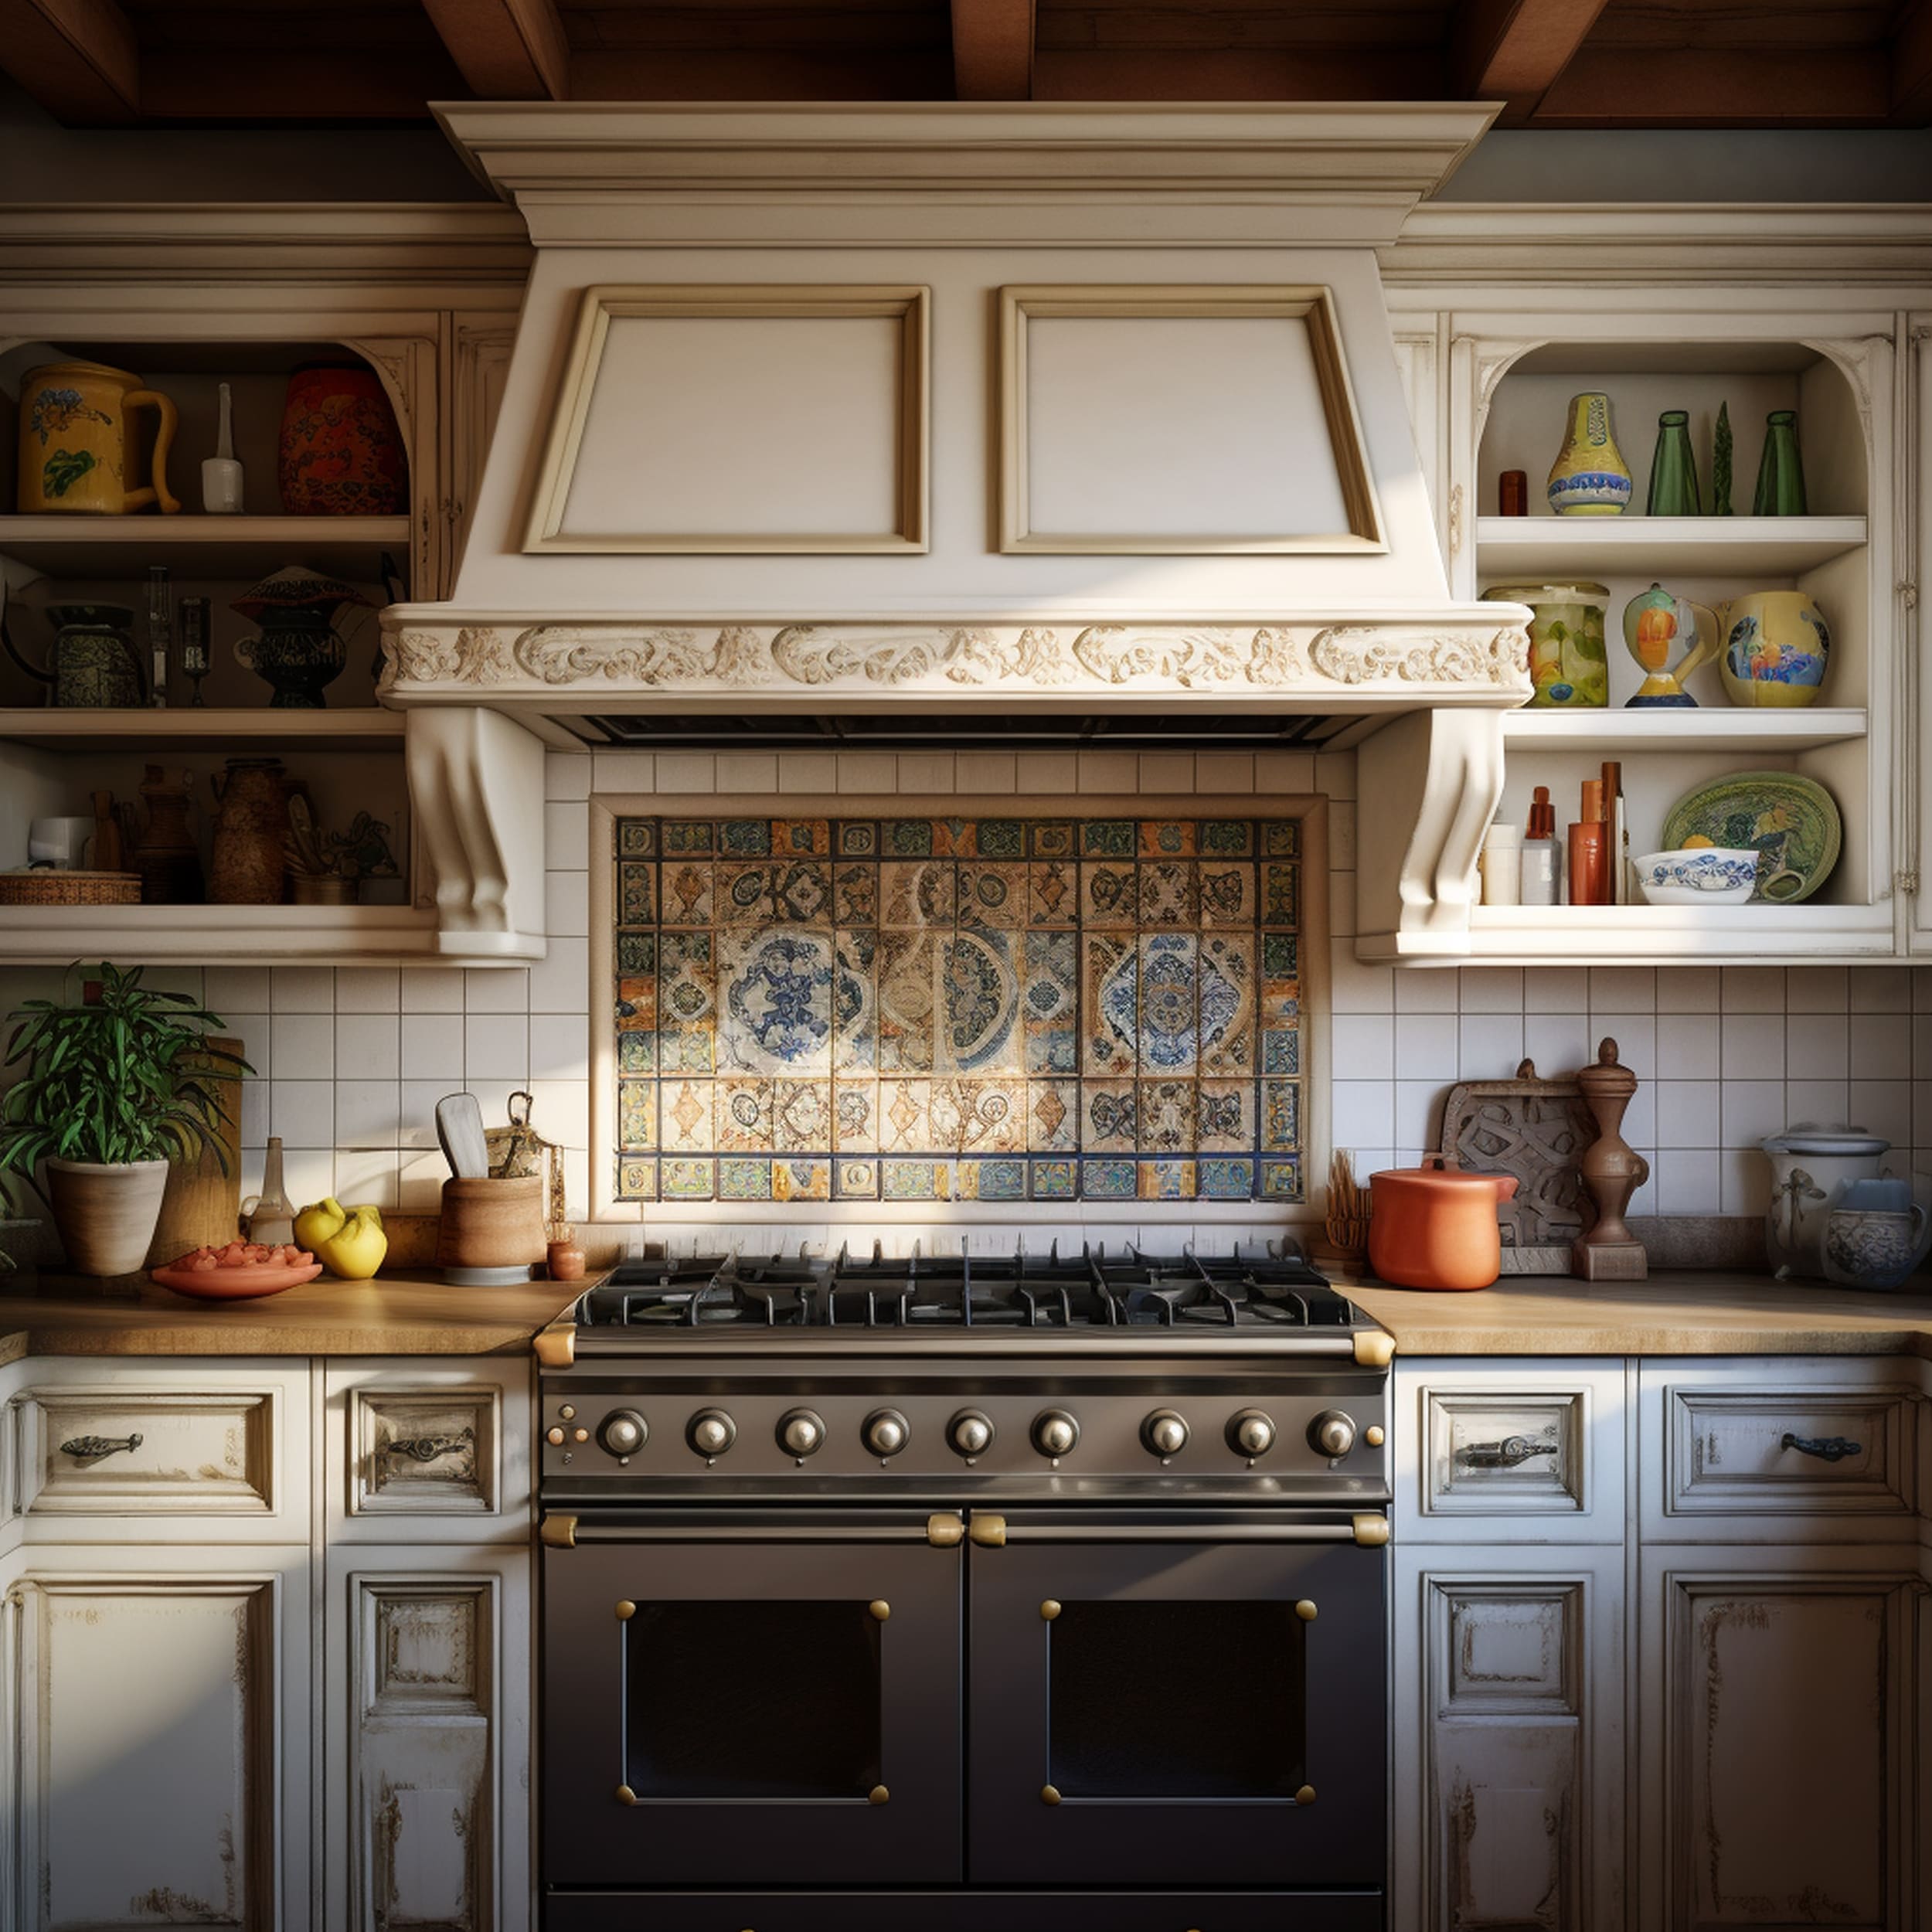 A Kitchen With a Spanish Tile Backsplash in a Complex Pattern